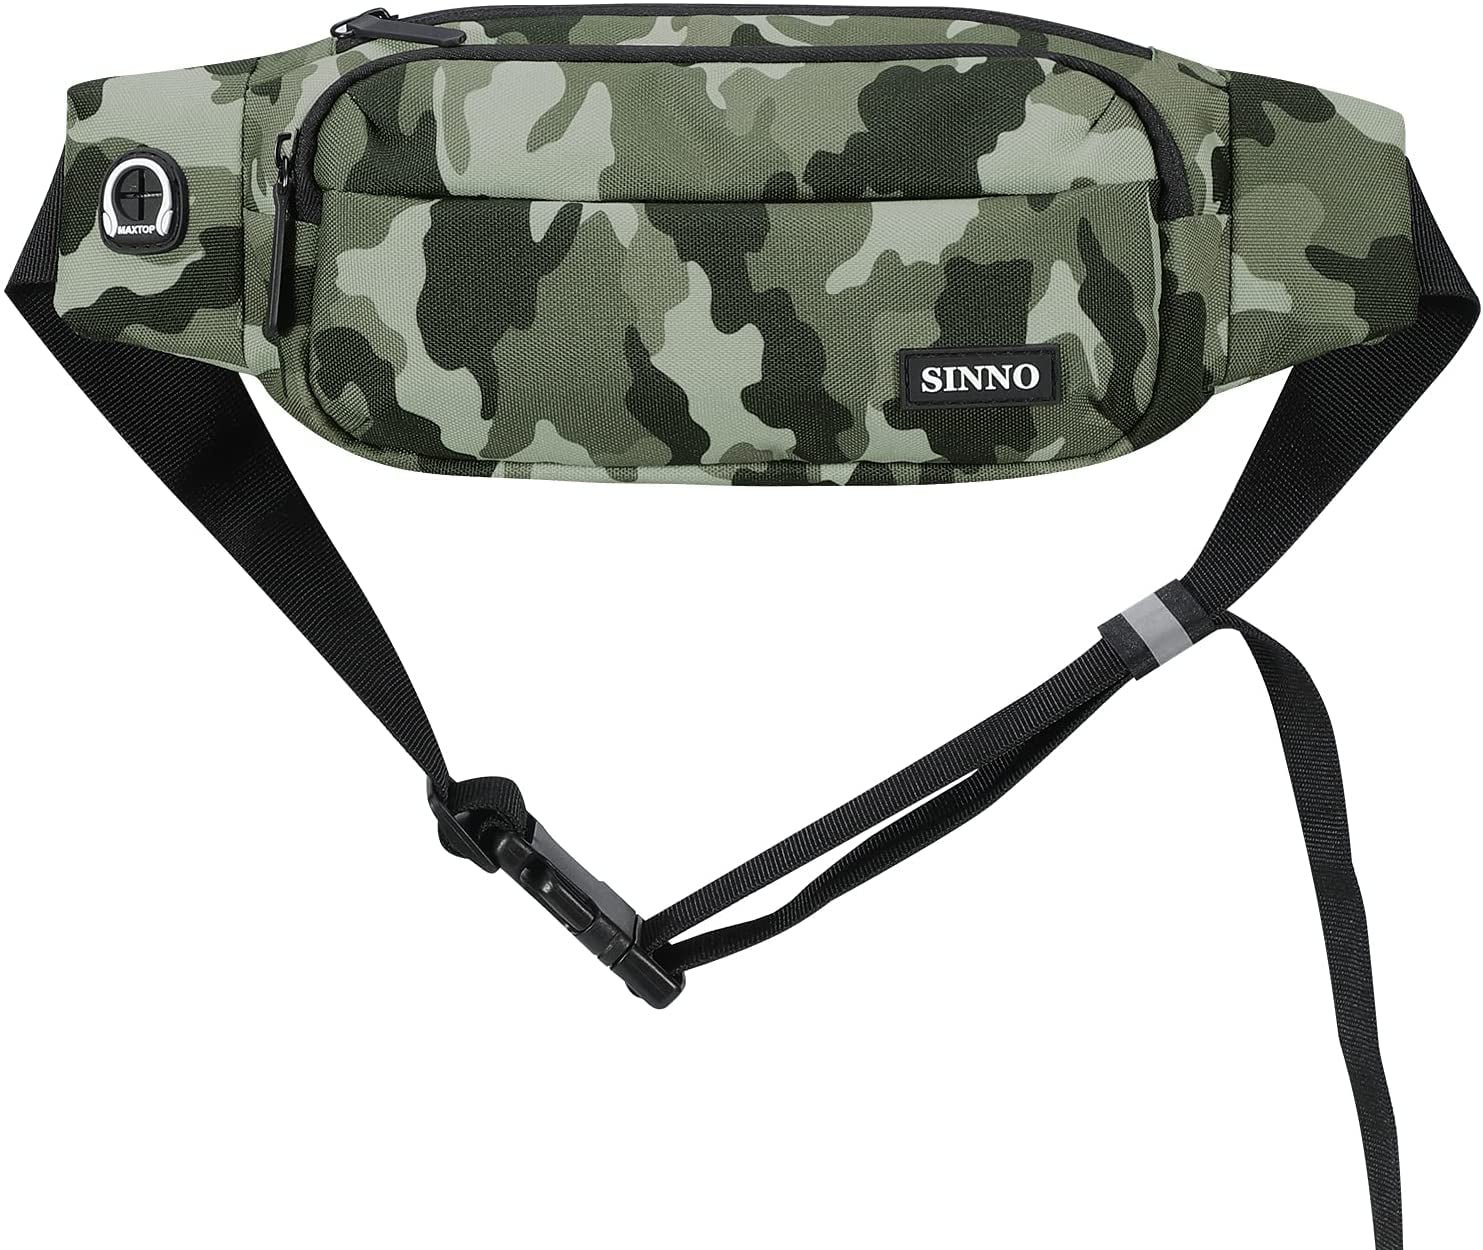 SINNO Large Fanny Pack With 4-Zipper Pockets for Running Hiking Travel Workout Dog Walking Outdoors Sport Fishing Waist Pack Bag 